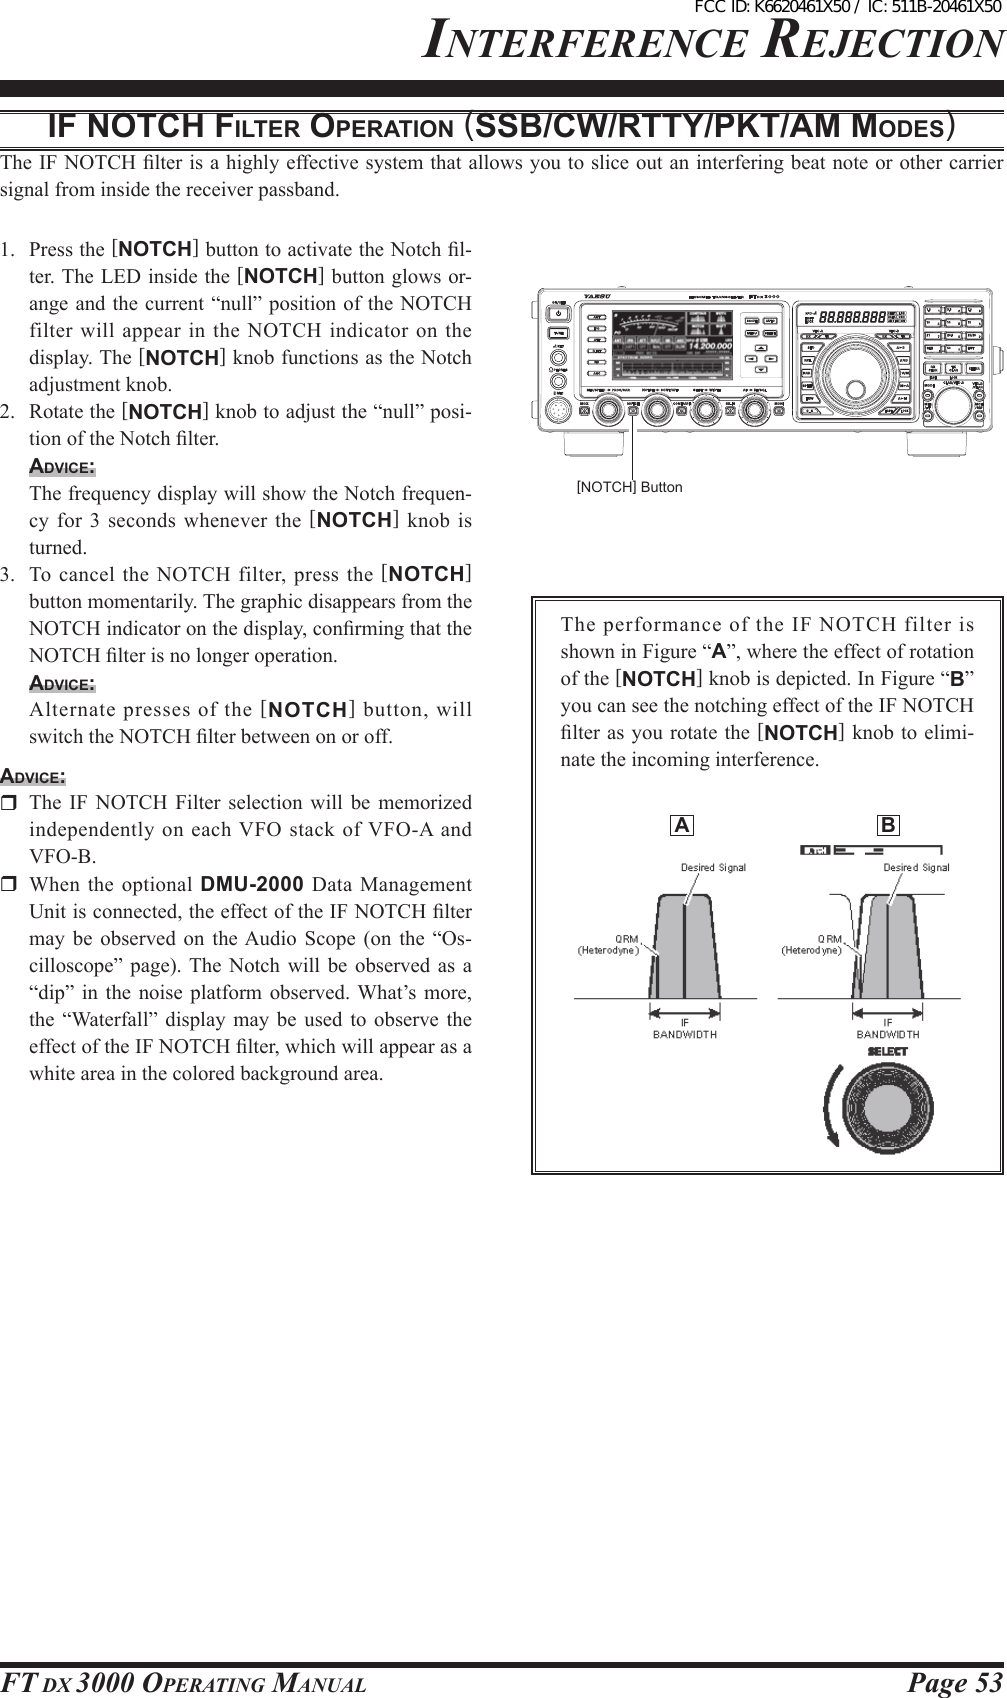 Page 53FT DX 3000 OperaTing ManualinTerFerence rejecTiOniF NotcH FilteR opeRAtioN (ssb/cw/Rtty/pKt/AM Modes)The IF NOTCH lter is a highly effective system that allows you to slice out an interfering beat note or other carrier signal from inside the receiver passband.1.  Press the [NOTCH] button to activate the Notch l-ter. The LED inside the [NOTCH] button glows or-ange and the current “null” position of the NOTCH filter will  appear in the NOTCH indicator on the display. The [NOTCH] knob functions as the Notch adjustment knob.2.  Rotate the [NOTCH] knob to adjust the “null” posi-tion of the Notch lter.Advice:  The frequency display will show the Notch frequen-cy for 3 seconds whenever the  [NOTCH]  knob  is turned.3.  To cancel  the NOTCH  filter, press the [NOTCH] button momentarily. The graphic disappears from the NOTCH indicator on the display, conrming that the NOTCH lter is no longer operation.Advice:  Alternate presses of the [NOTCH] button, will switch the NOTCH lter between on or off.Advice:  The  IF  NOTCH  Filter  selection  will  be  memorized independently  on each VFO stack of VFO-A and VFO-B.  When  the  optional  DMU-2000 Data  Management Unit is connected, the effect of the IF NOTCH lter may  be  observed on  the Audio  Scope  (on  the “Os-cilloscope”  page). The  Notch  will  be observed  as  a “dip”  in  the  noise platform  observed. What’s  more, the  “Waterfall”  display may  be  used  to  observe the effect of the IF NOTCH lter, which will appear as a white area in the colored background area.[NOTCH] ButtonThe performance of the IF NOTCH filter is shown in Figure “A”, where the effect of rotation of the [NOTCH] knob is depicted. In Figure “B” you can see the notching effect of the IF NOTCH lter as  you rotate the [NOTCH] knob to elimi-nate the incoming interference.  A  BFCC ID: K6620461X50 / IC: 511B-20461X50